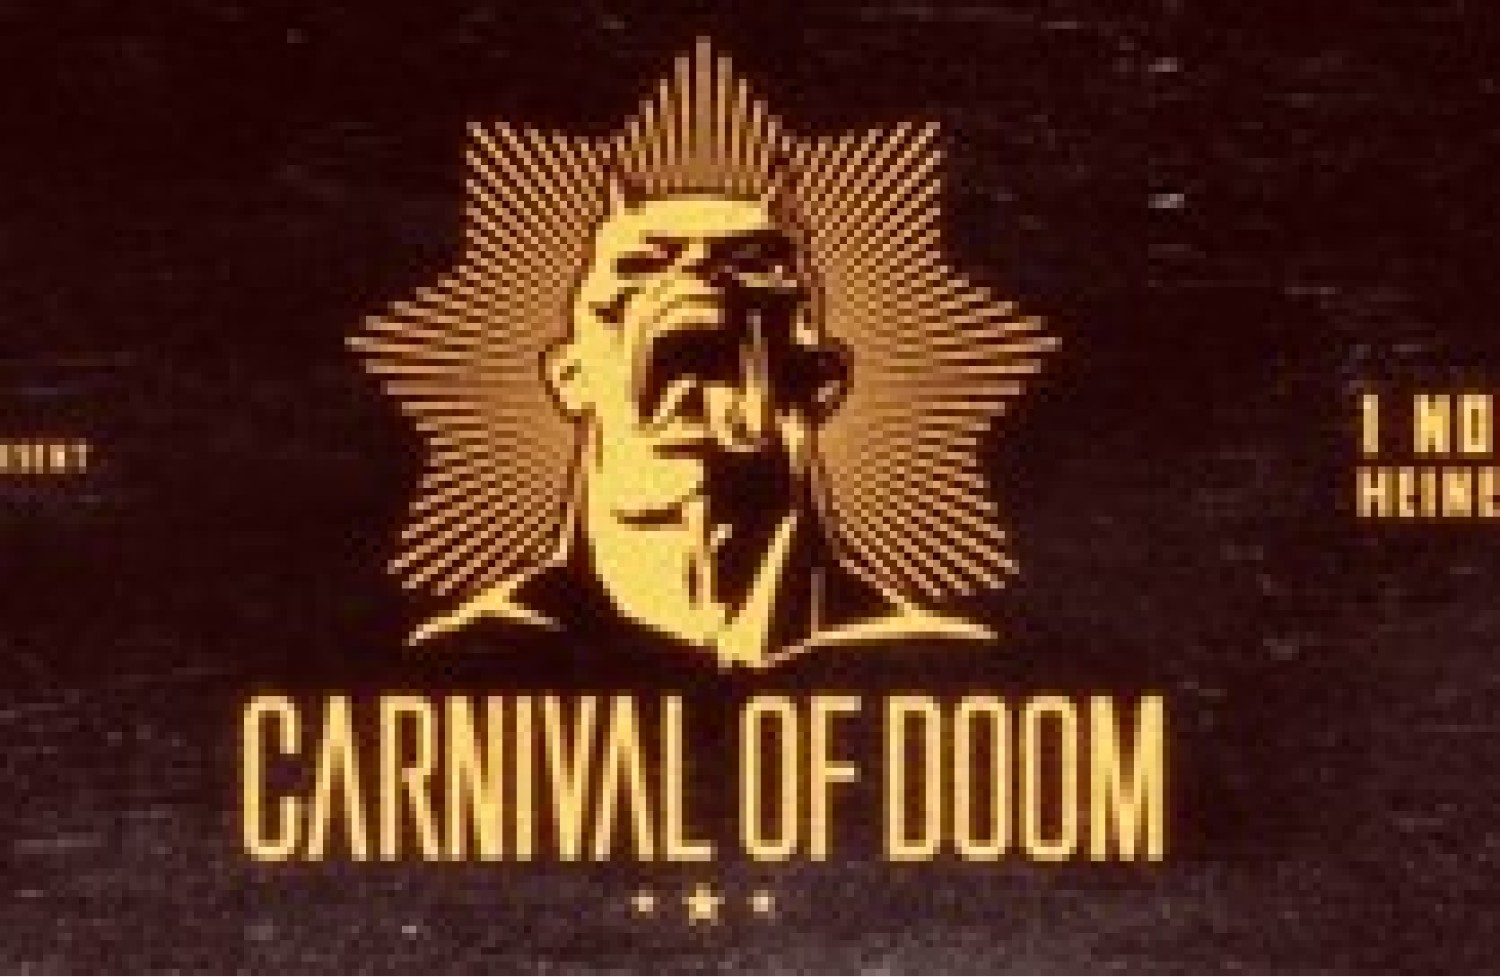 Party report: Carnival of Doom, Amsterdam (01-11-2014)